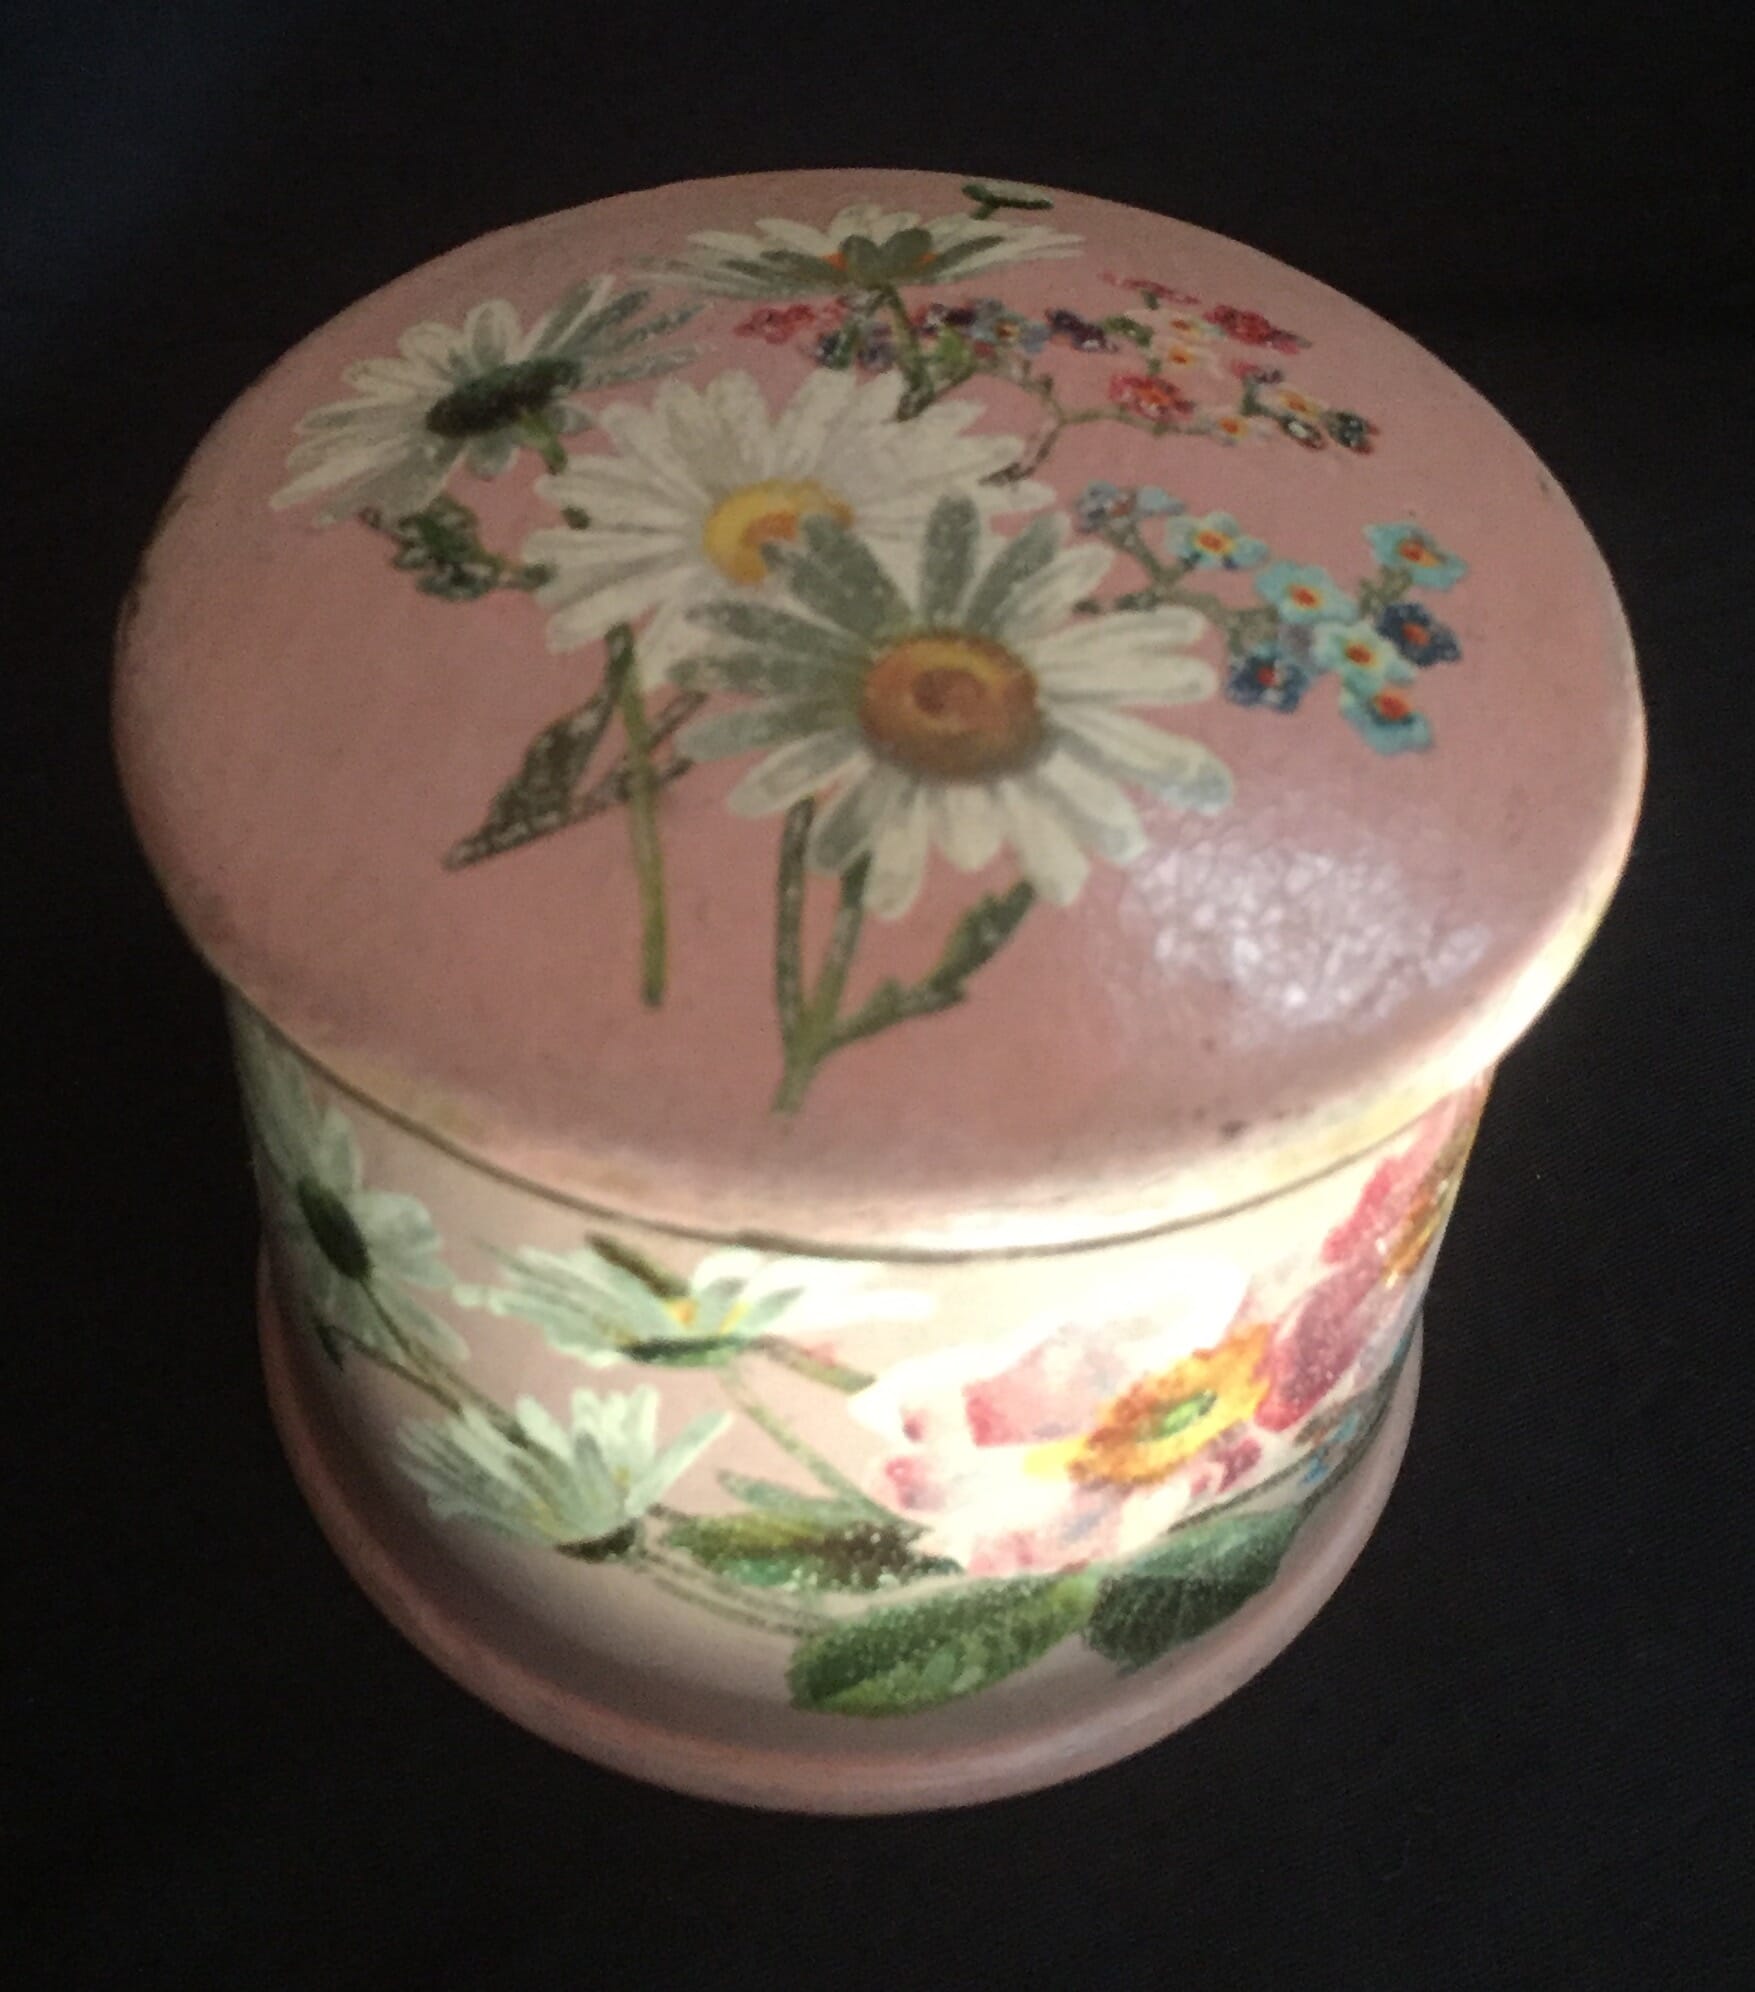 Victorian paper mache lidded box decorated with flowers painted on a pink ground, c. 1860-0